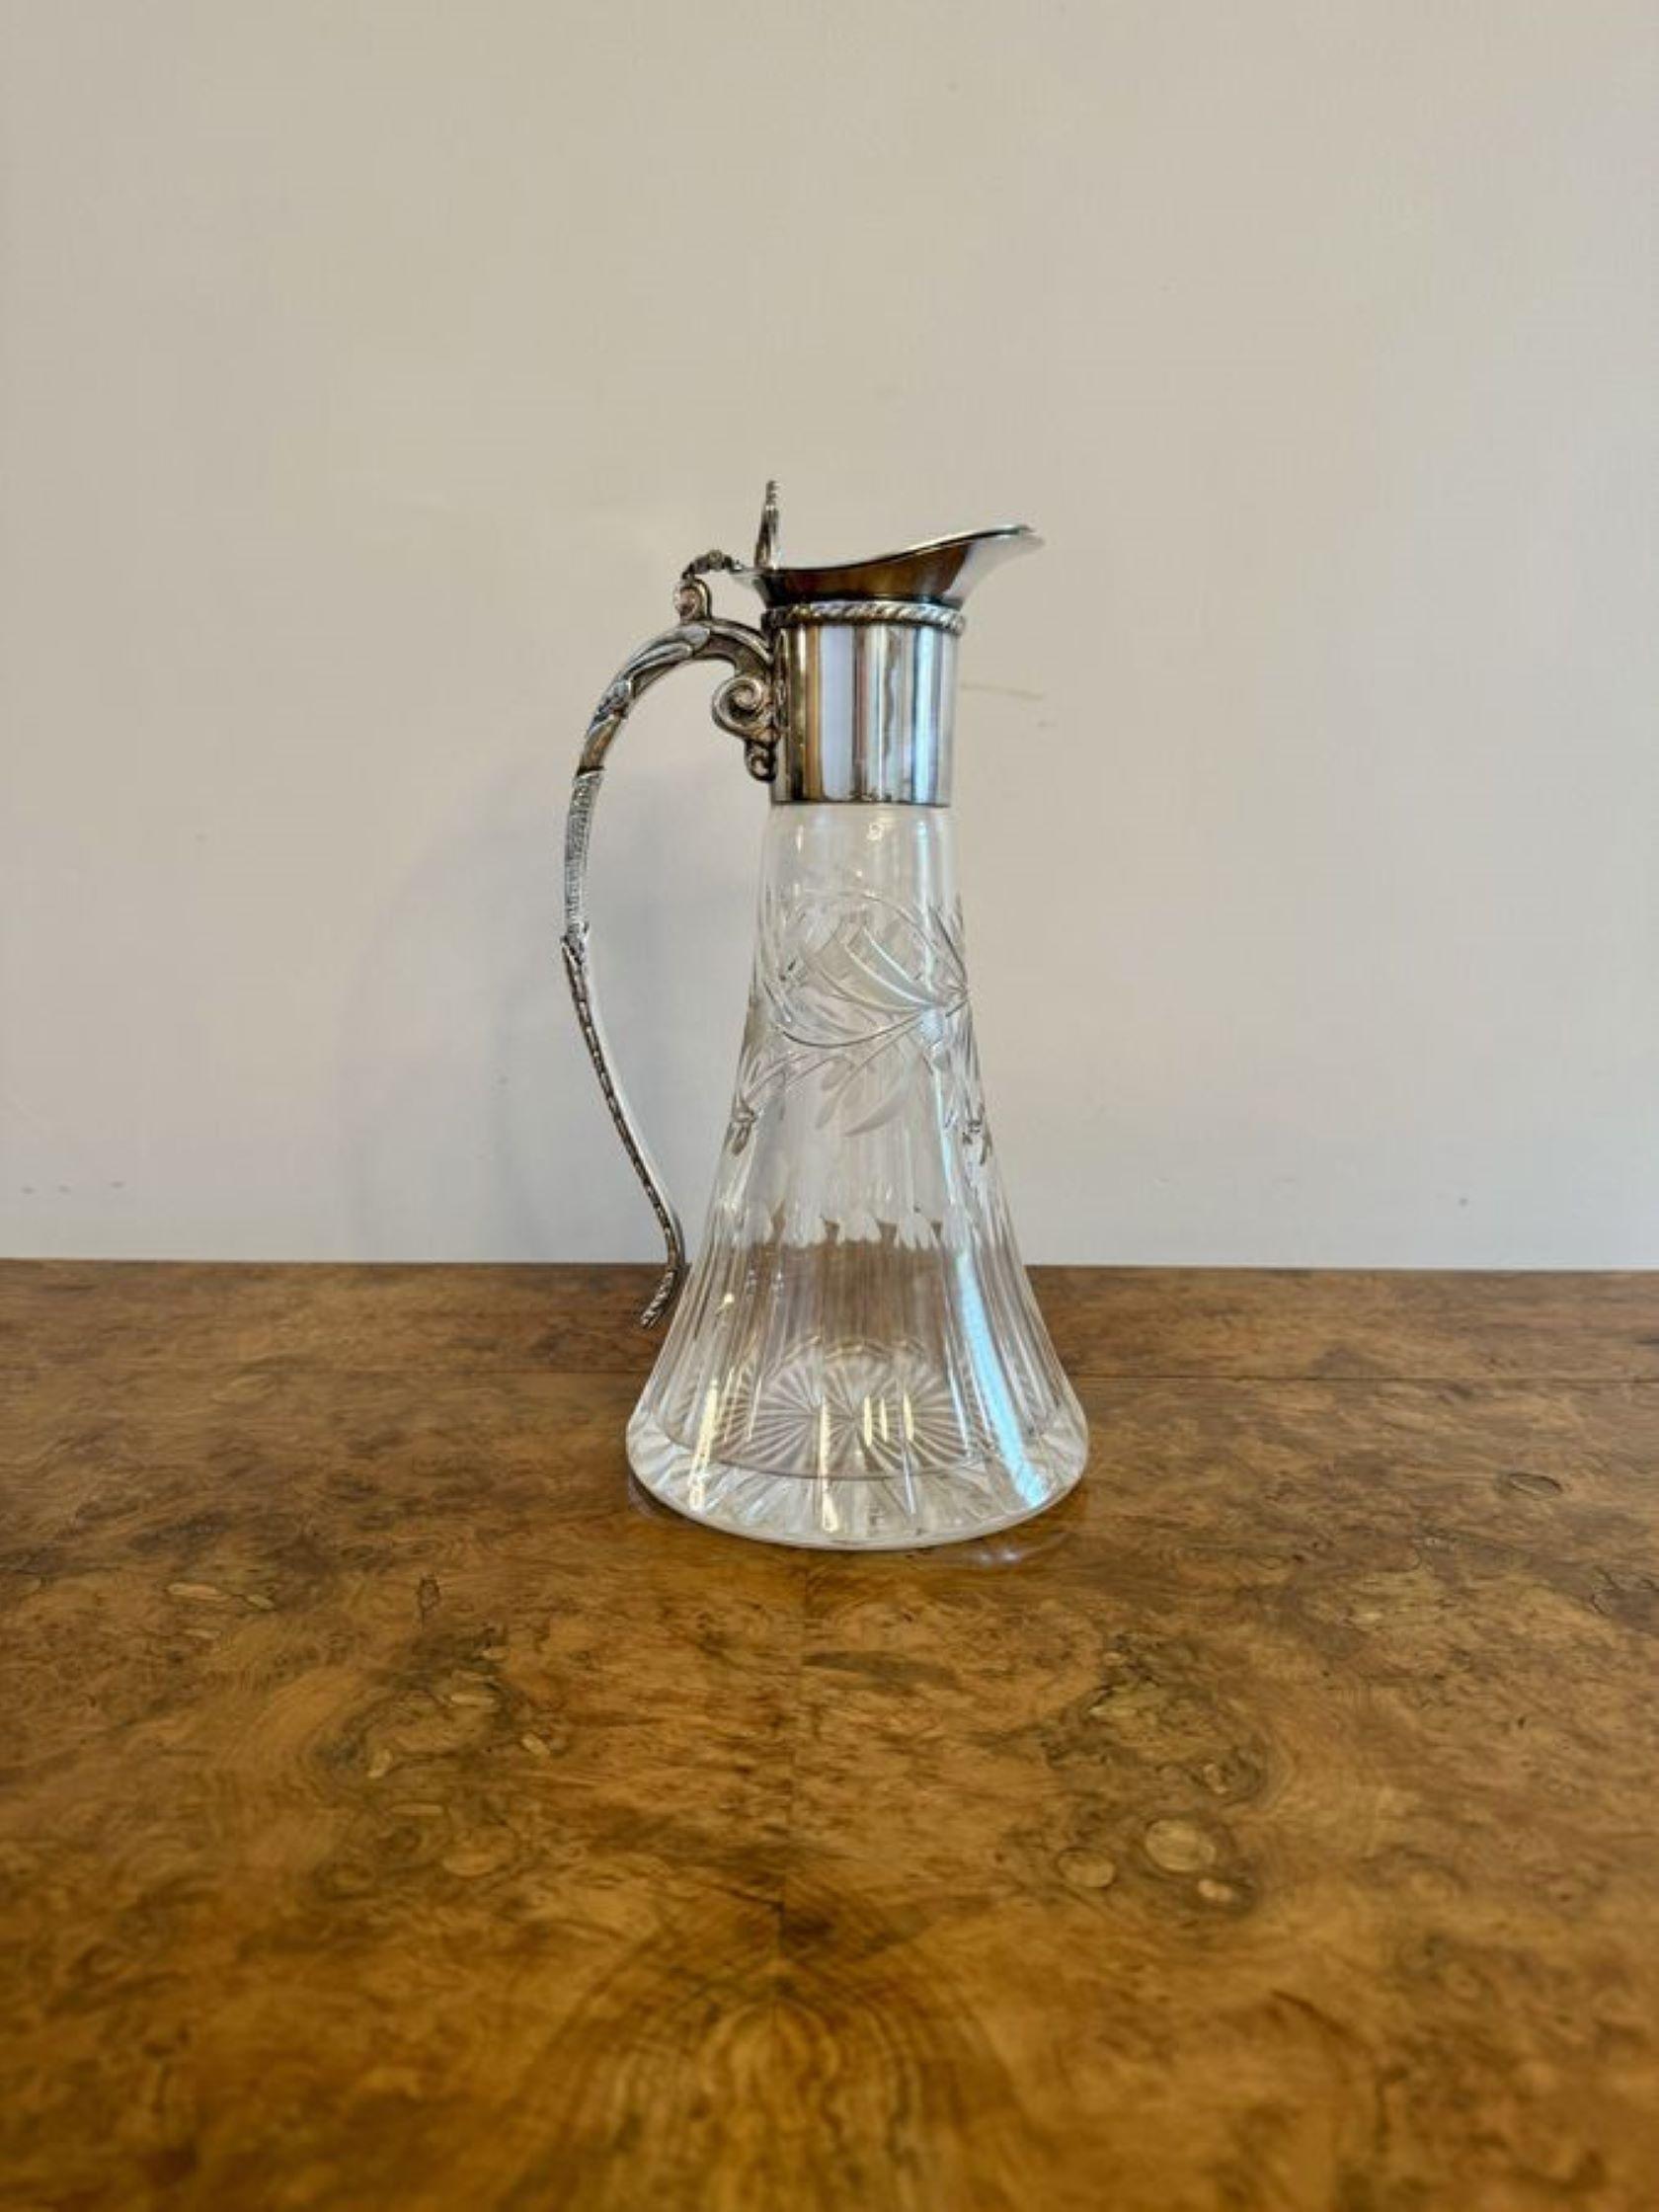 Outstanding quality antique Victorian silver plated claret jug having a quality antique Victorian silver plated claret jug, with a silver plated top with a lift up lid, a shaped spout and an ornate silver plated shaped handle to the back, fantastic